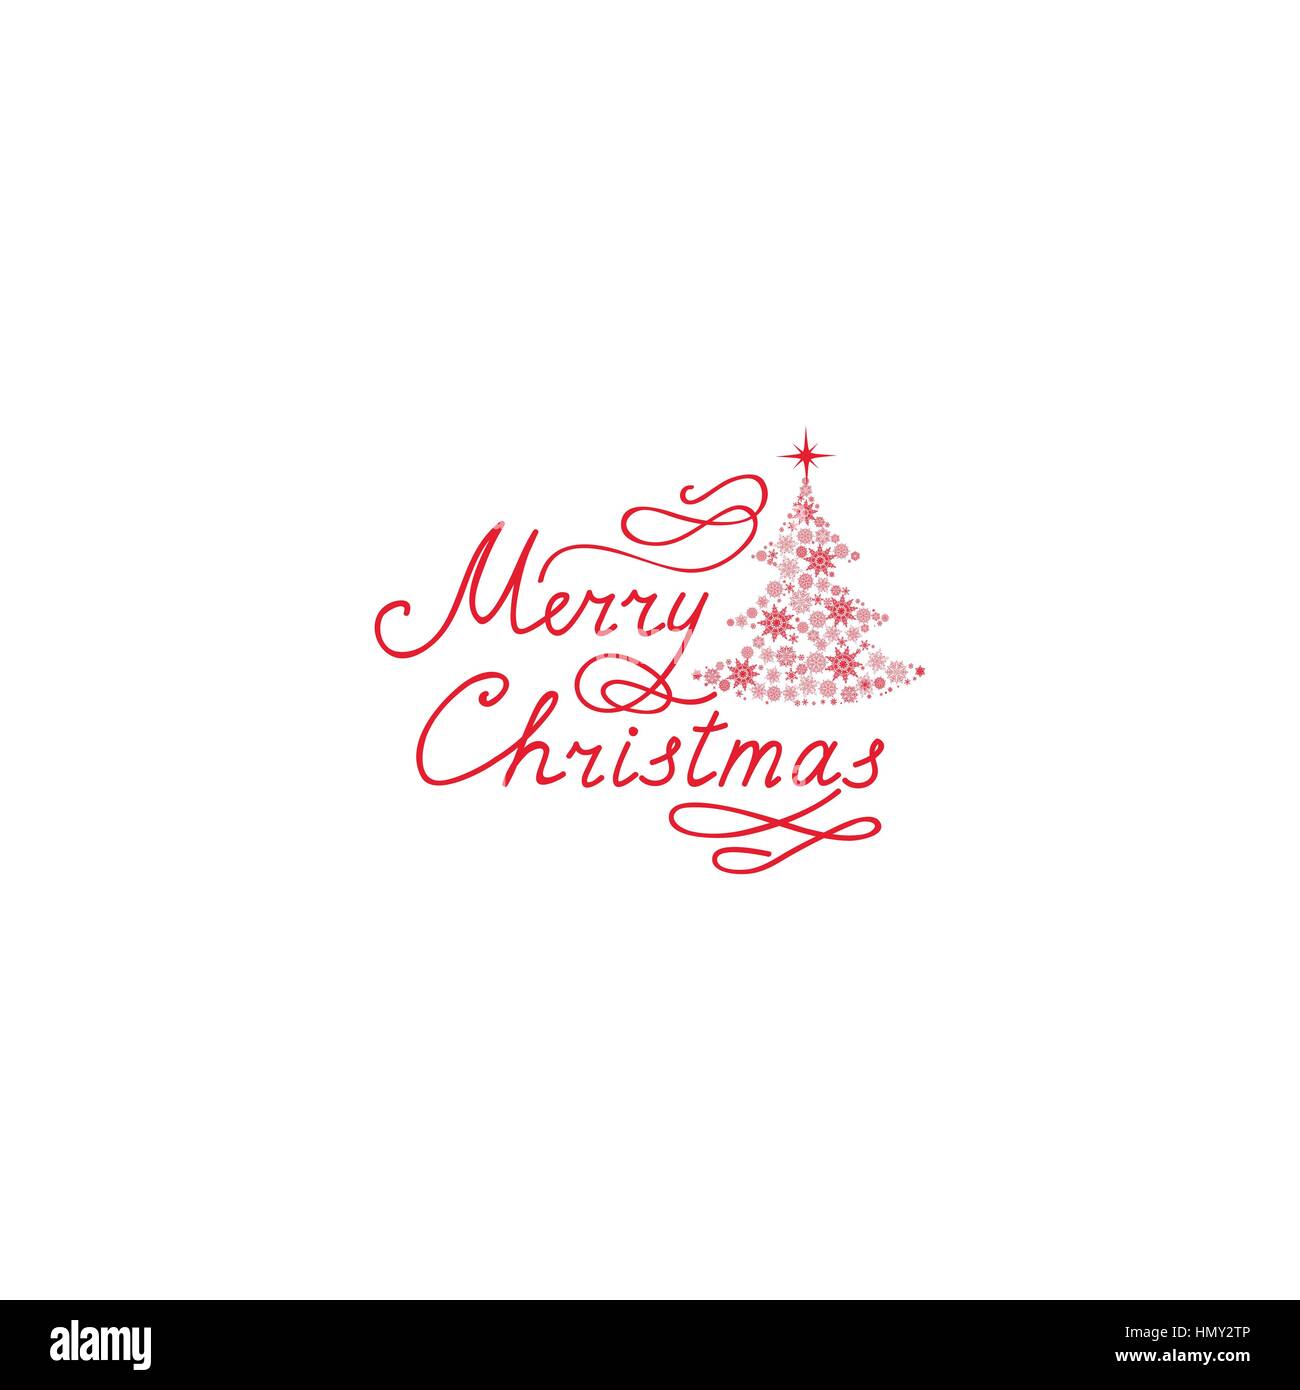 Christmas Background Holiday wallpaper